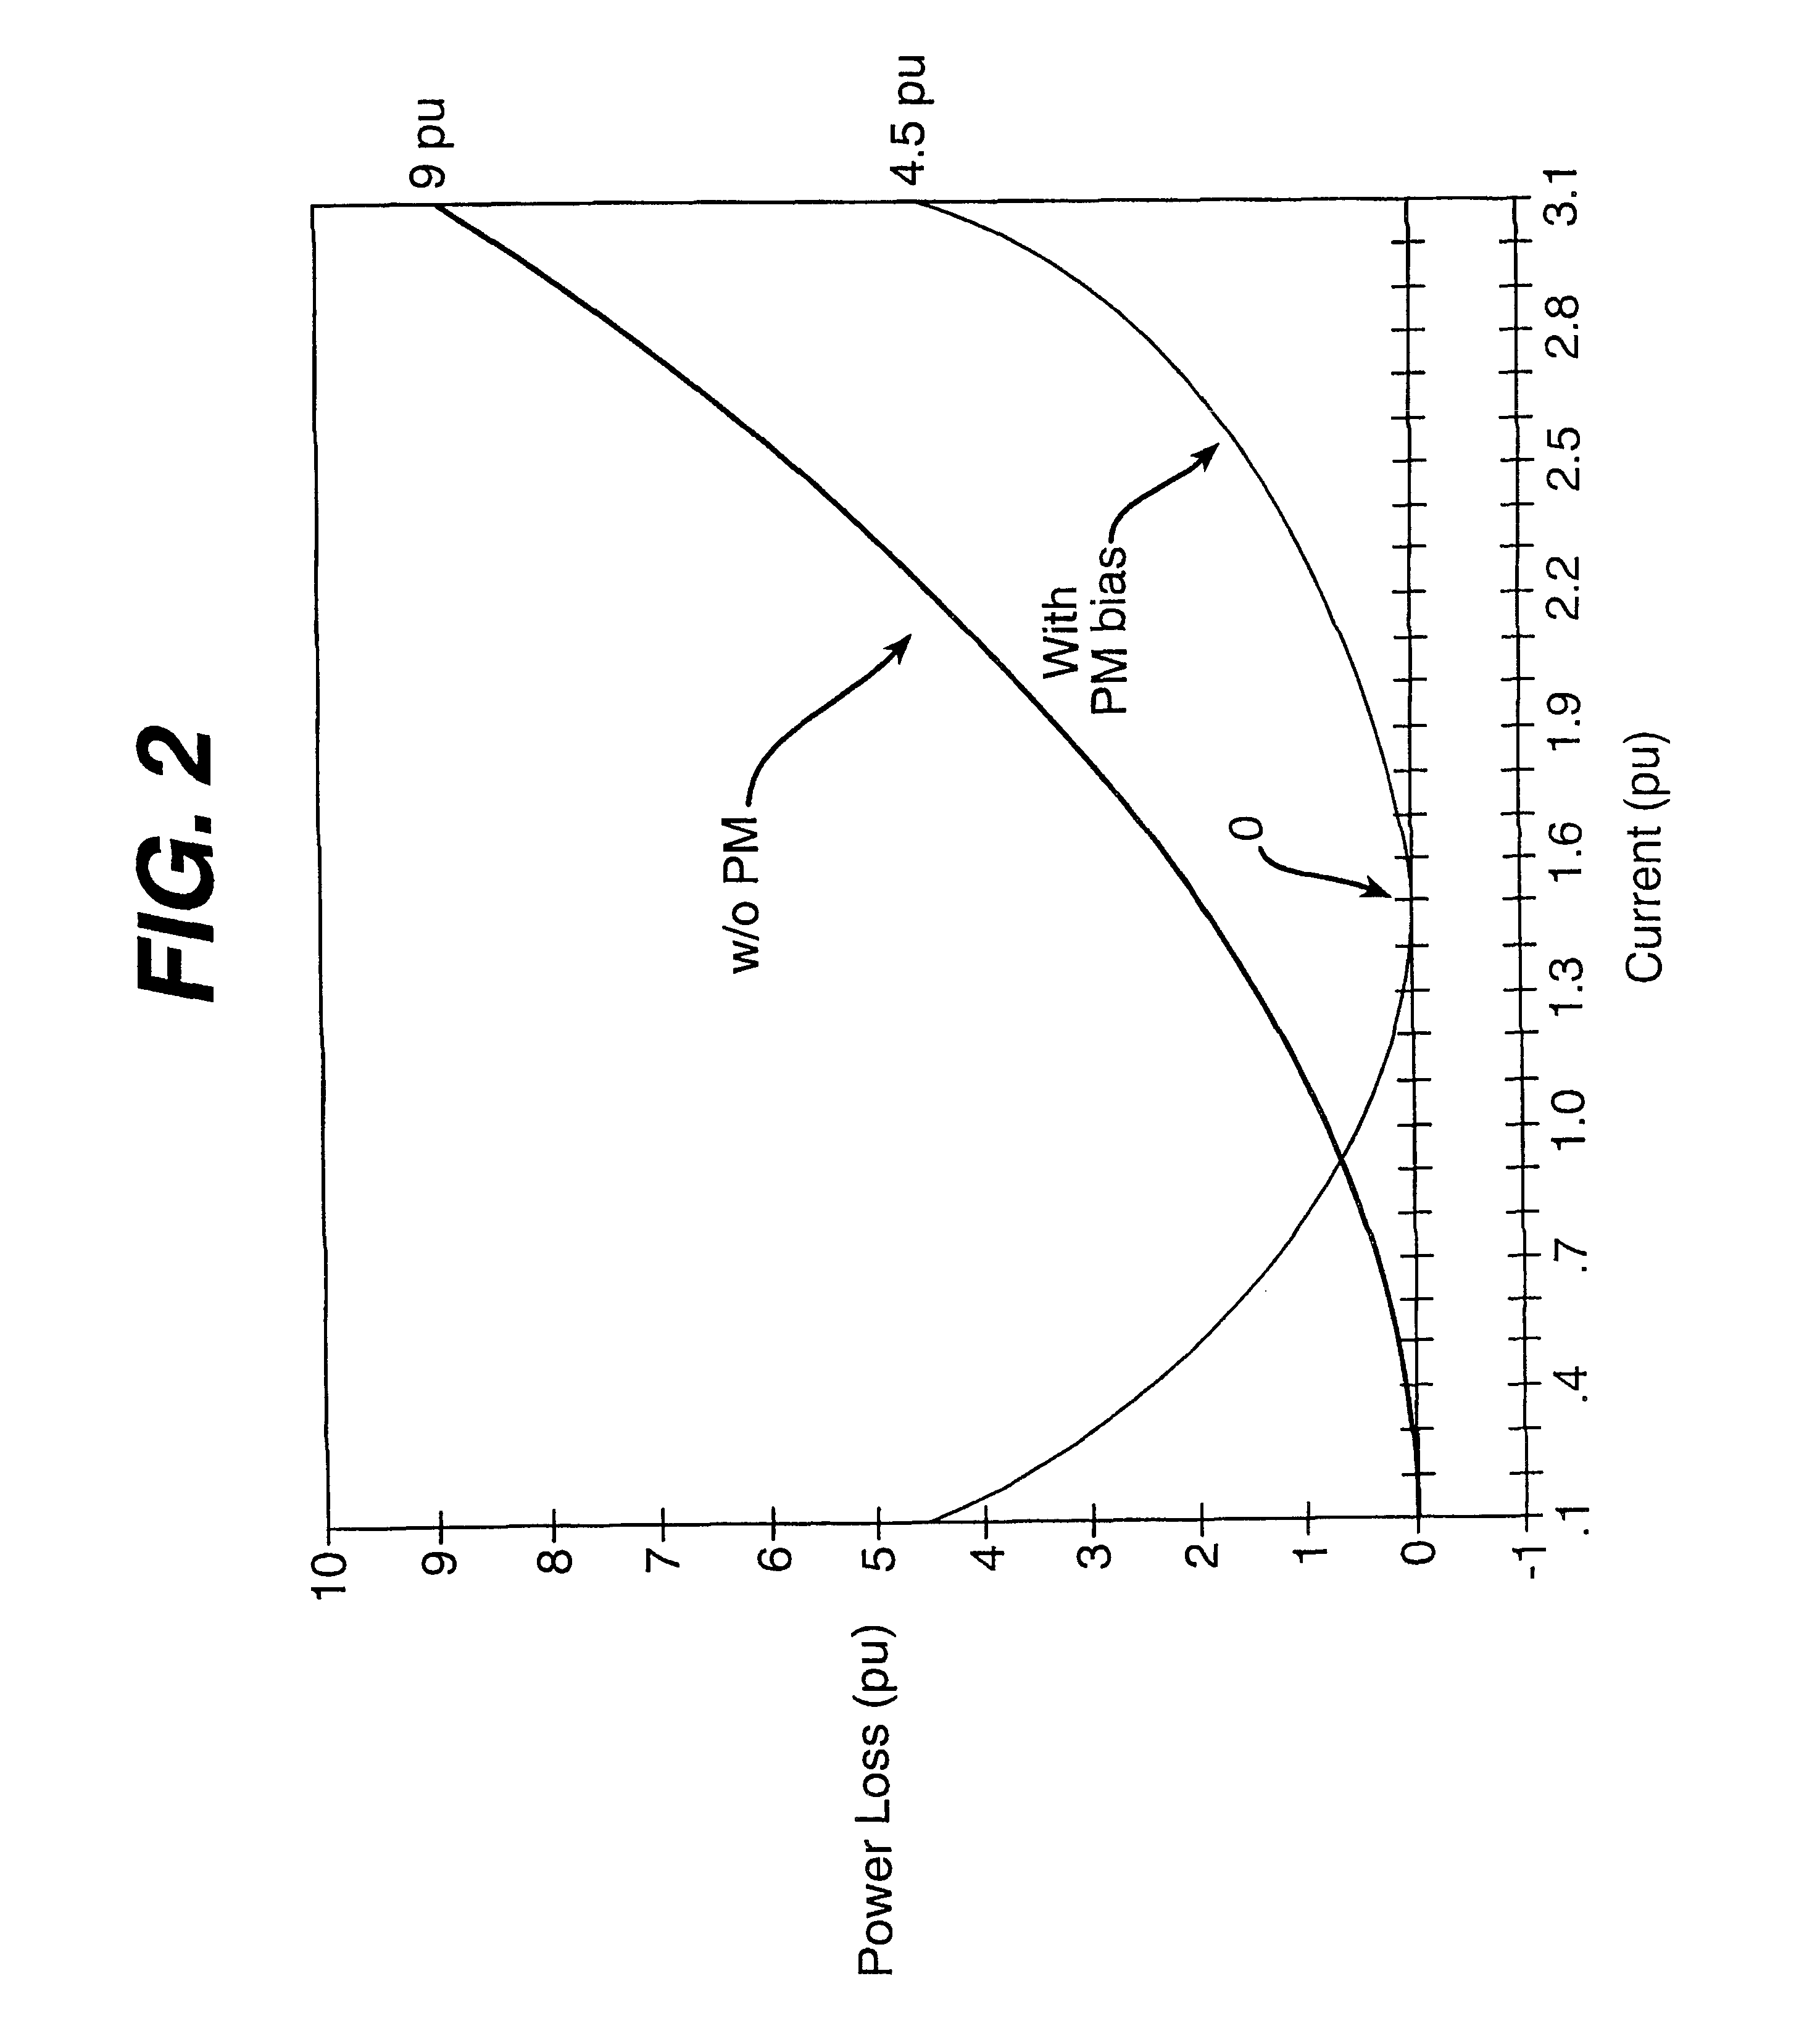 Hybrid synchronous machines comprising permanent magnets and excitation windings in cylindrical element slots